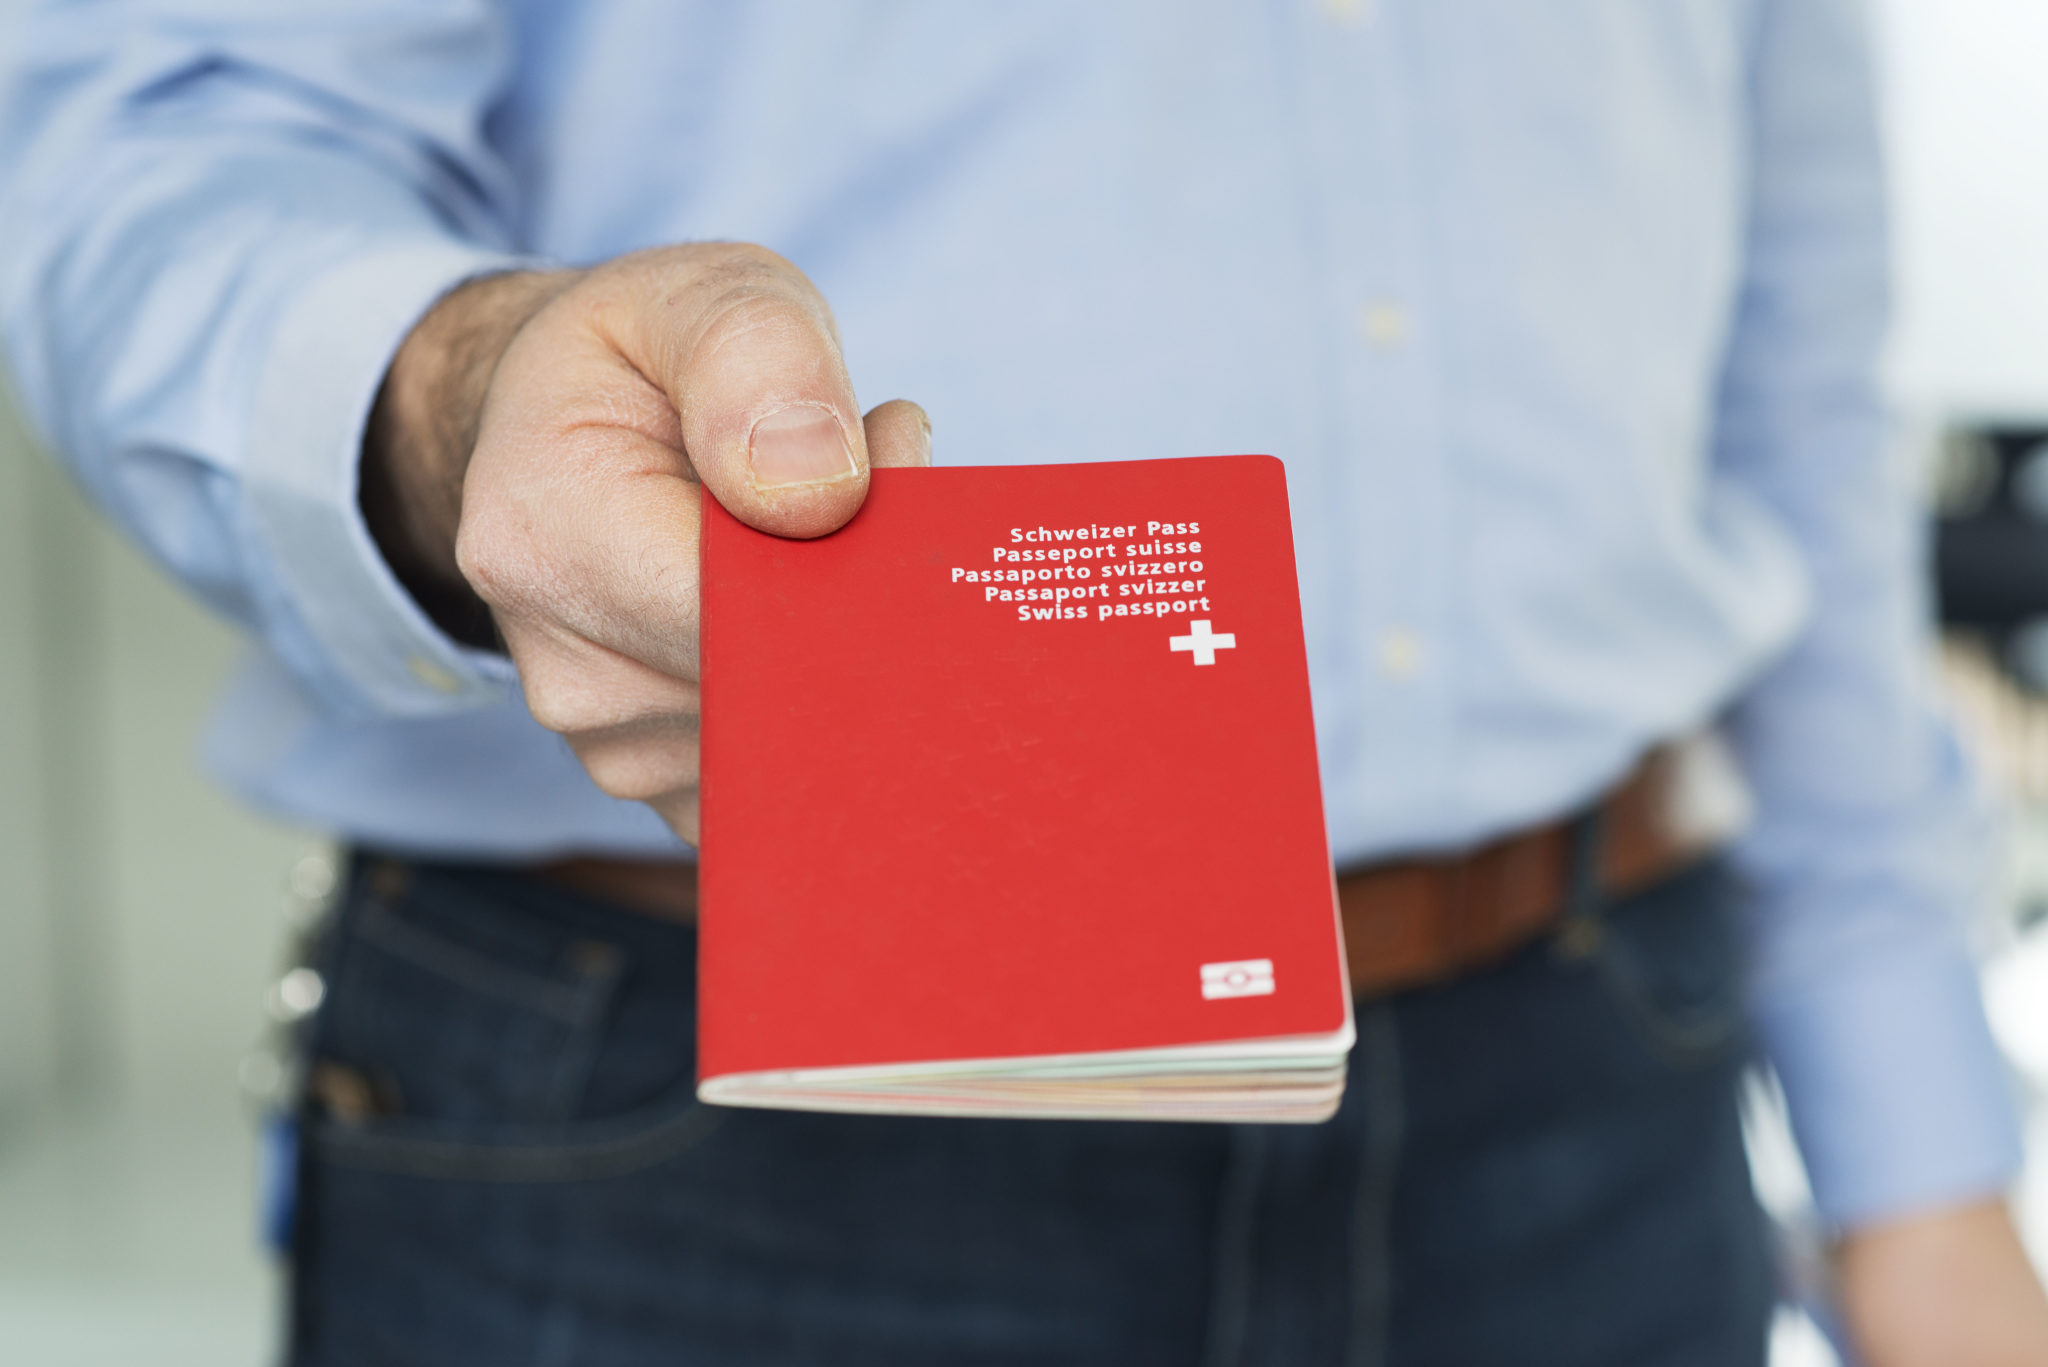 Switzerland Citizens Are Eligible For Vietnam Electronic Visa (E-Visa) From February 2019